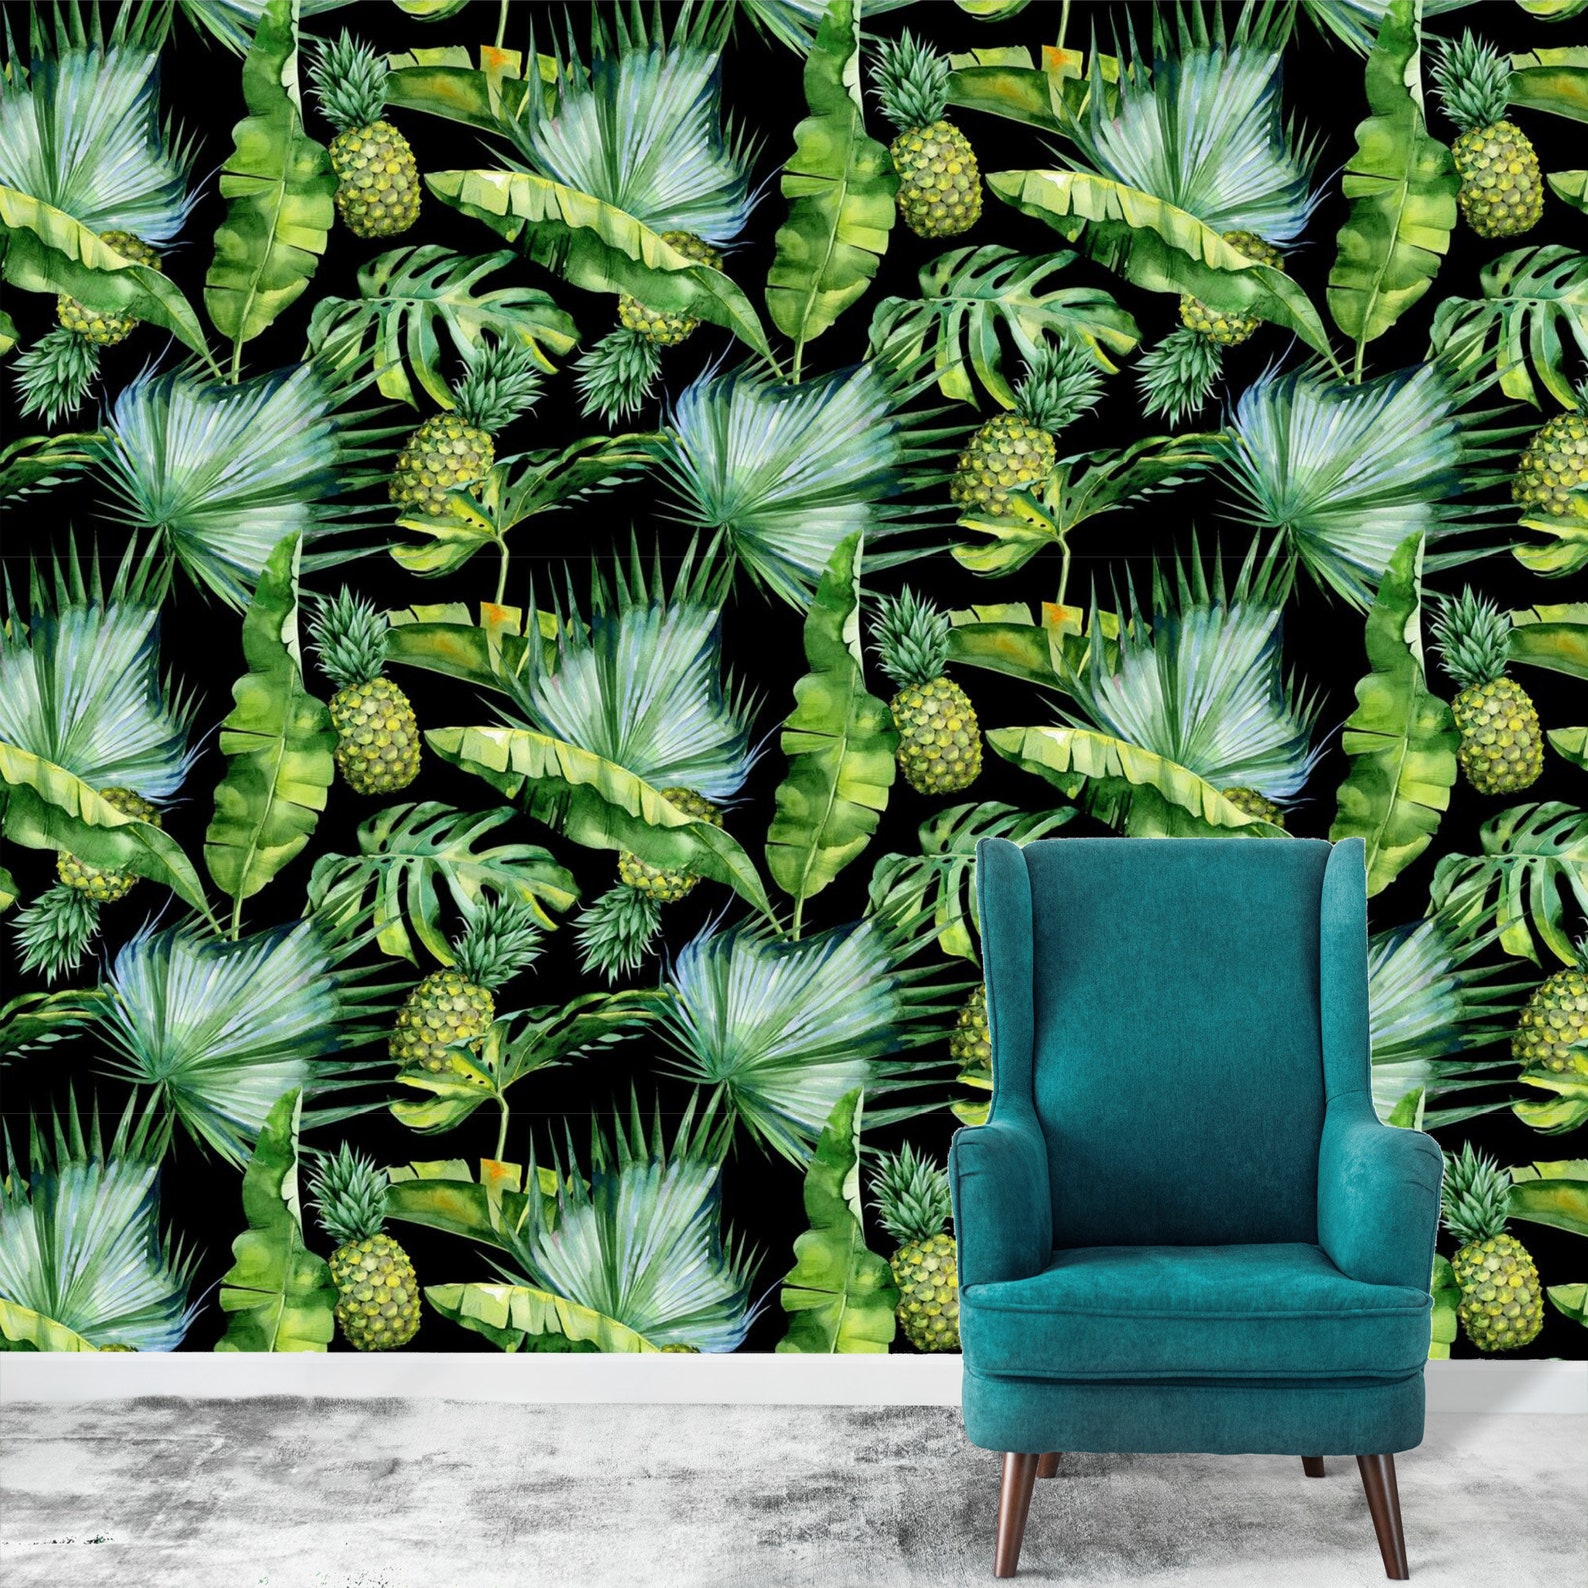 Wallpaper Banana Leaves Peel and stick Tropical Wall Paper | Etsy